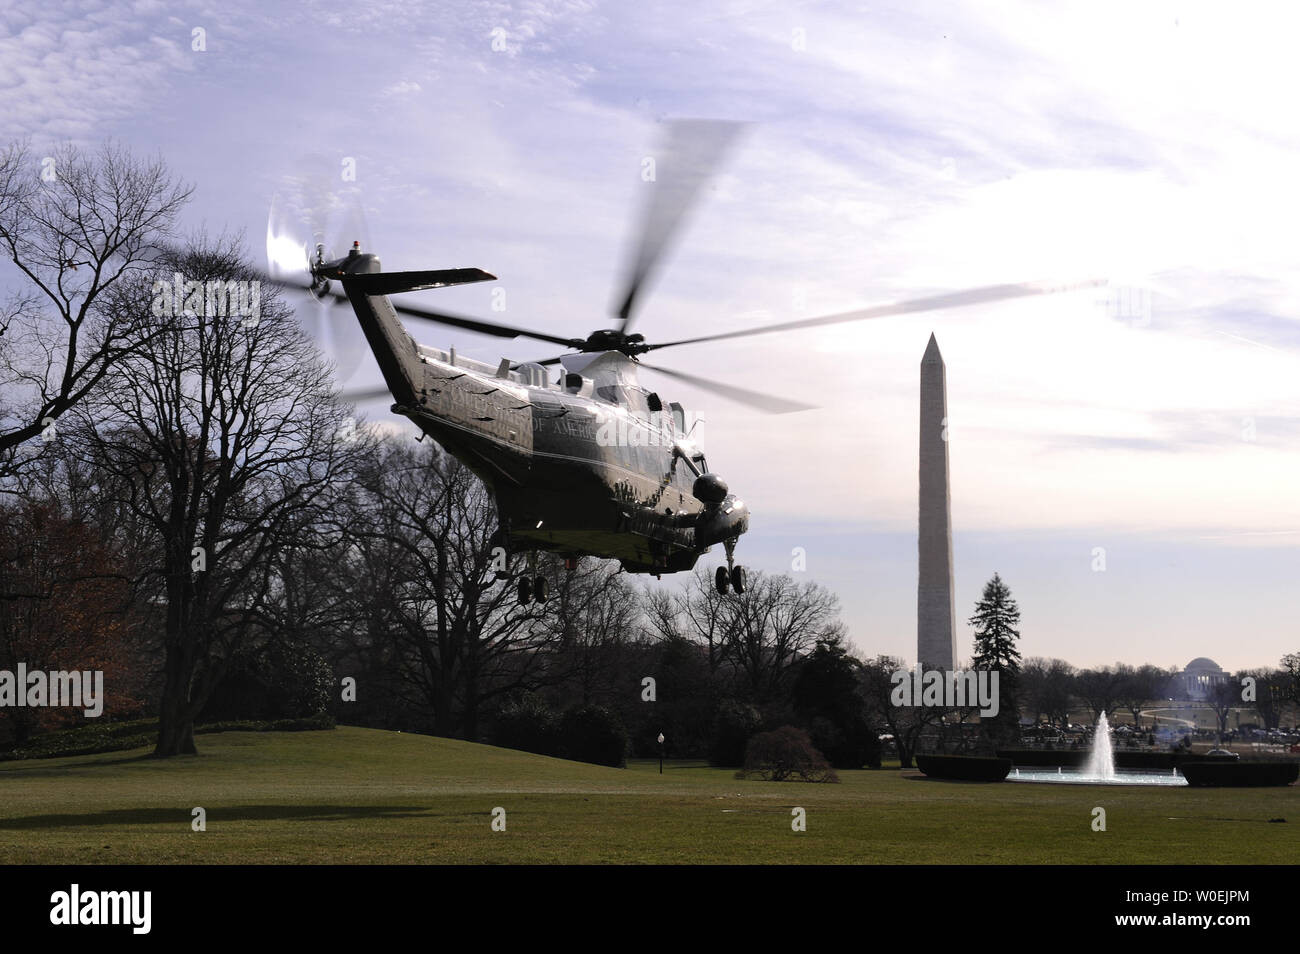 Marine One carrying President Bush, his wife, Laura, and daughter Jenna, teaks off from the South Lawn of the White House in Washington on December 23, 2008. The Bush's are on their way to spend the holidays at Camp David and then to the Bush Ranch in Texas. (UPI Photo/Kevin Dietsch) Stock Photo